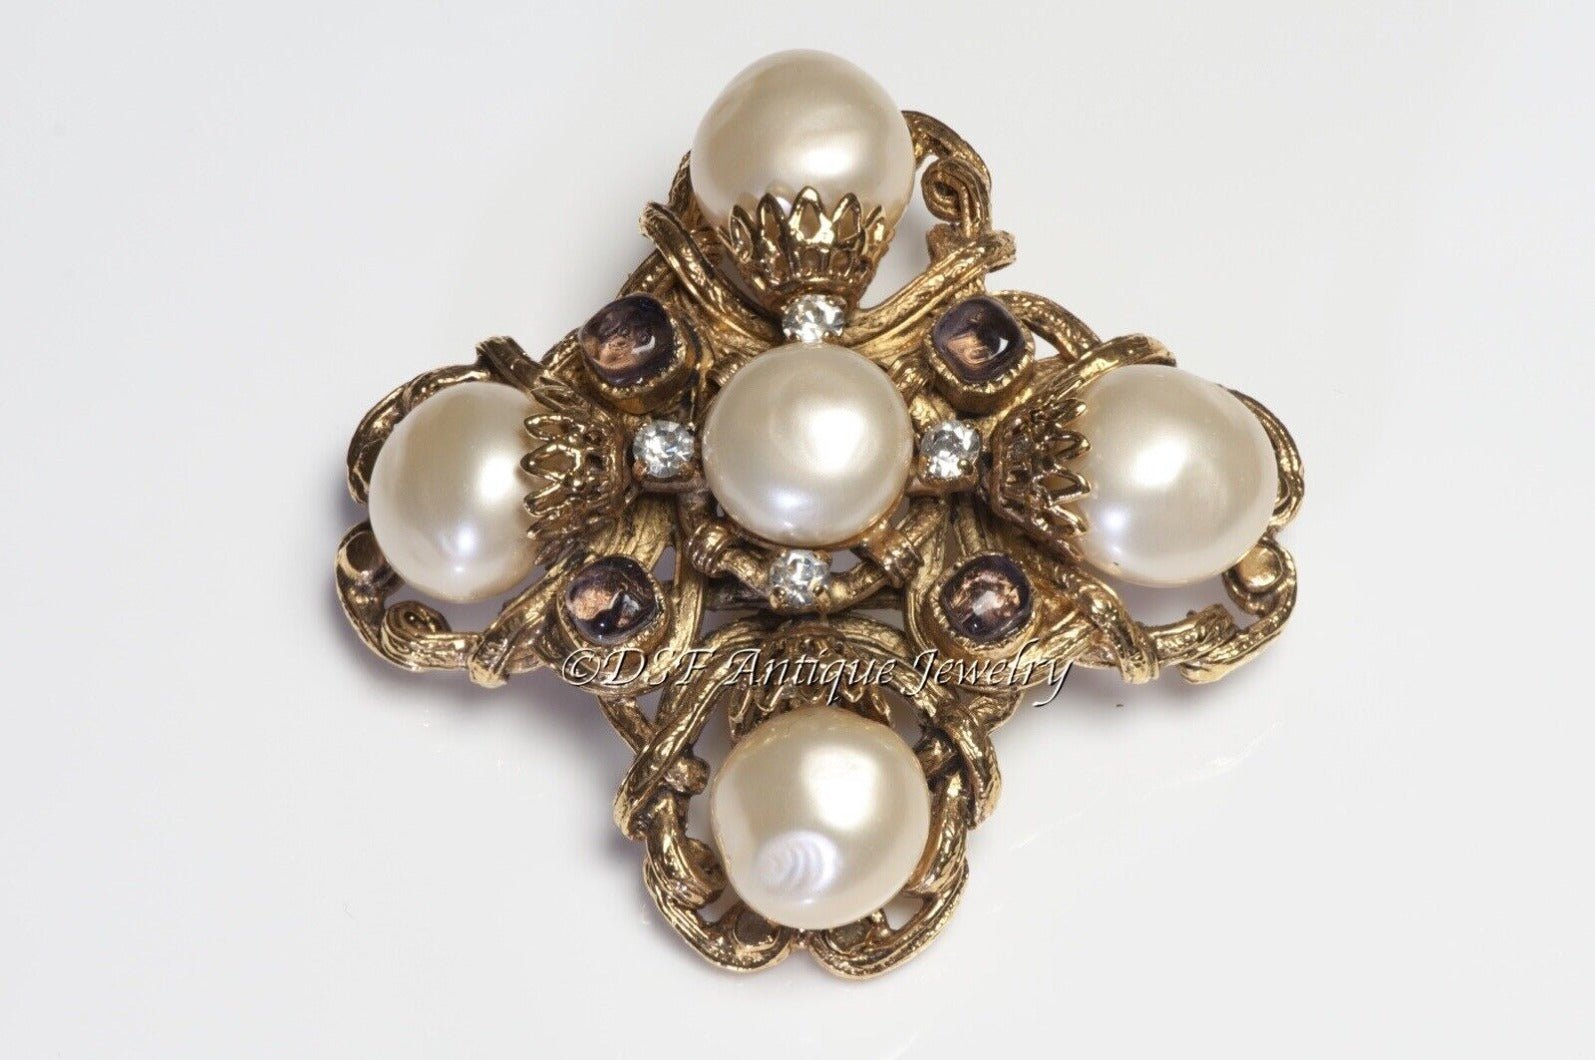 CHANEL Fall 1999 Maison Gripoix Glass Cross Pearl Pendant Brooch - DSF Antique Jewelry